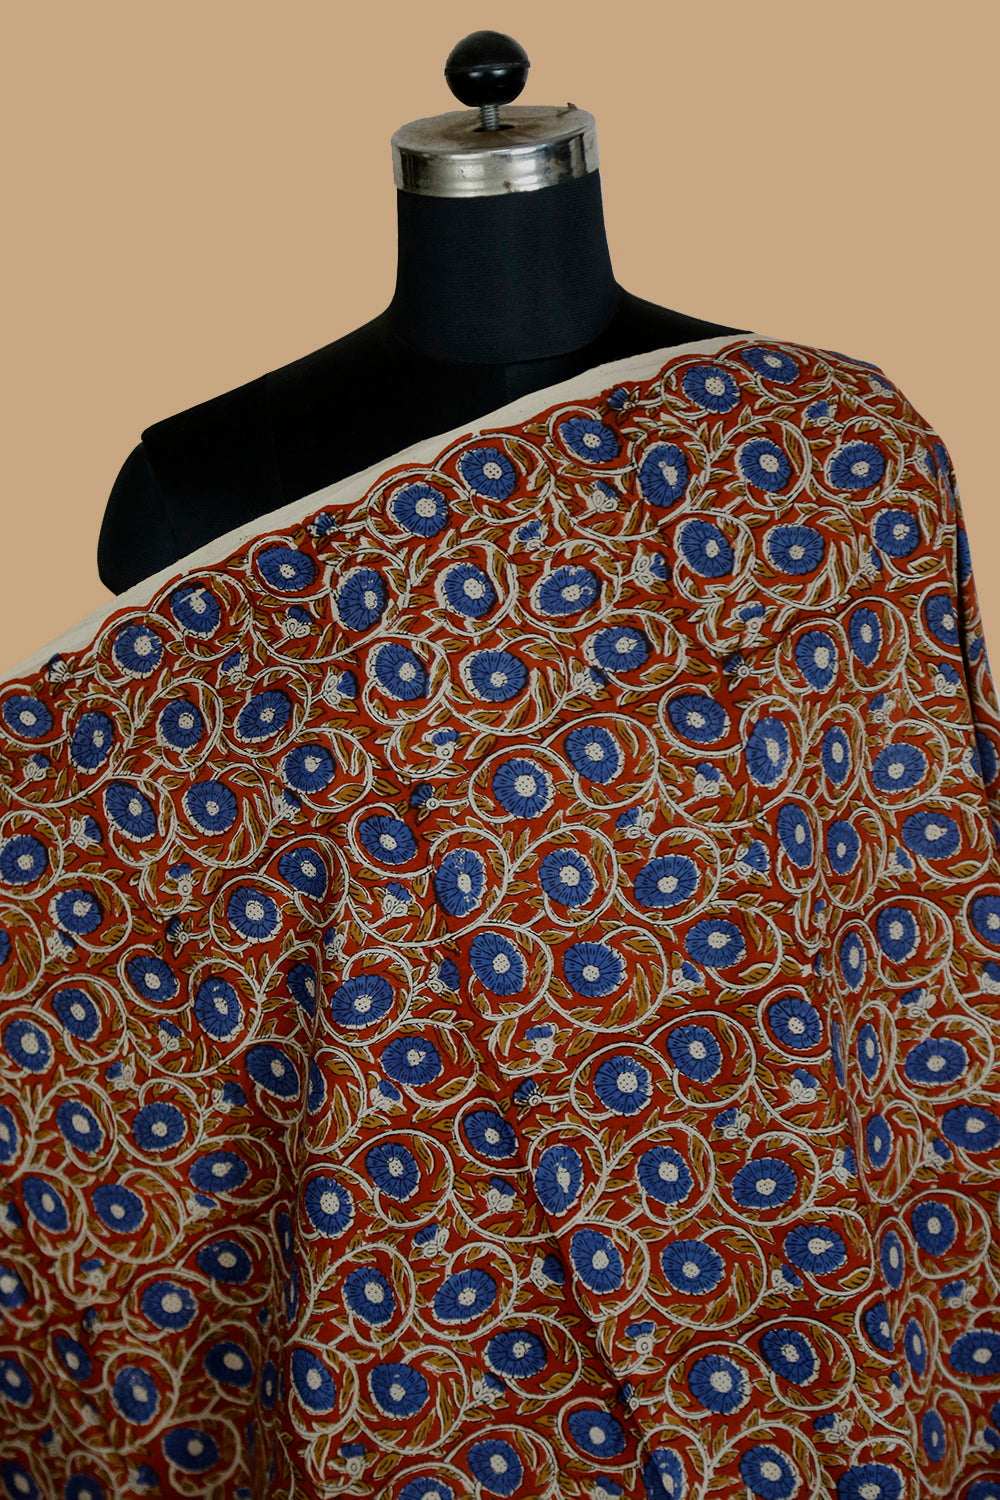 Blue Floral on Maroon Block Printed Cotton Fabric - 0.95m